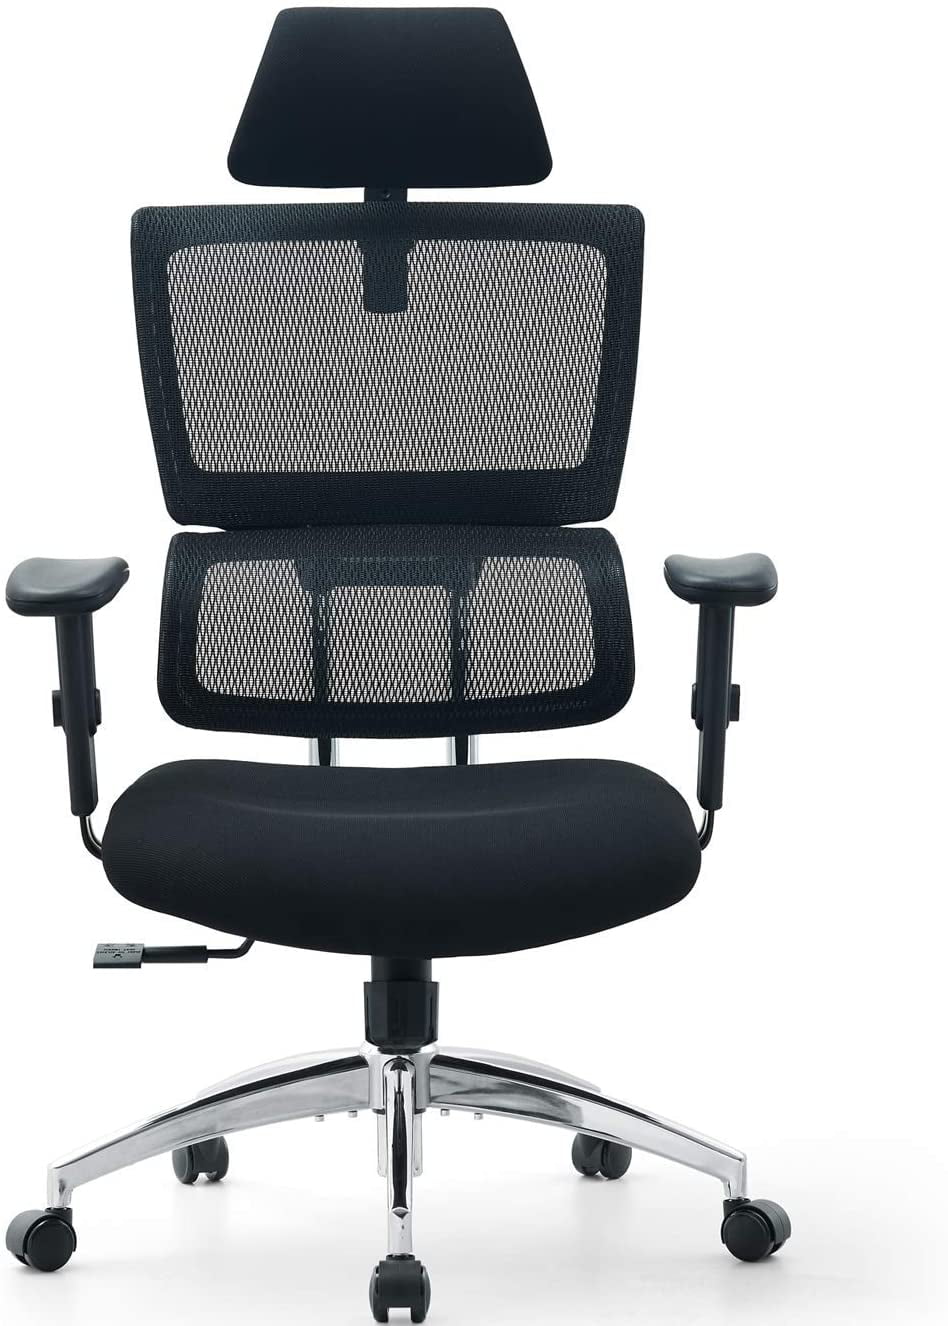 Travel Trove - Ergonomic Office Chair with Headrest - Reclining Office  Chair - Ergonomic Desk Chair - Ergonomic Chairs for Home Office - Ergonomic